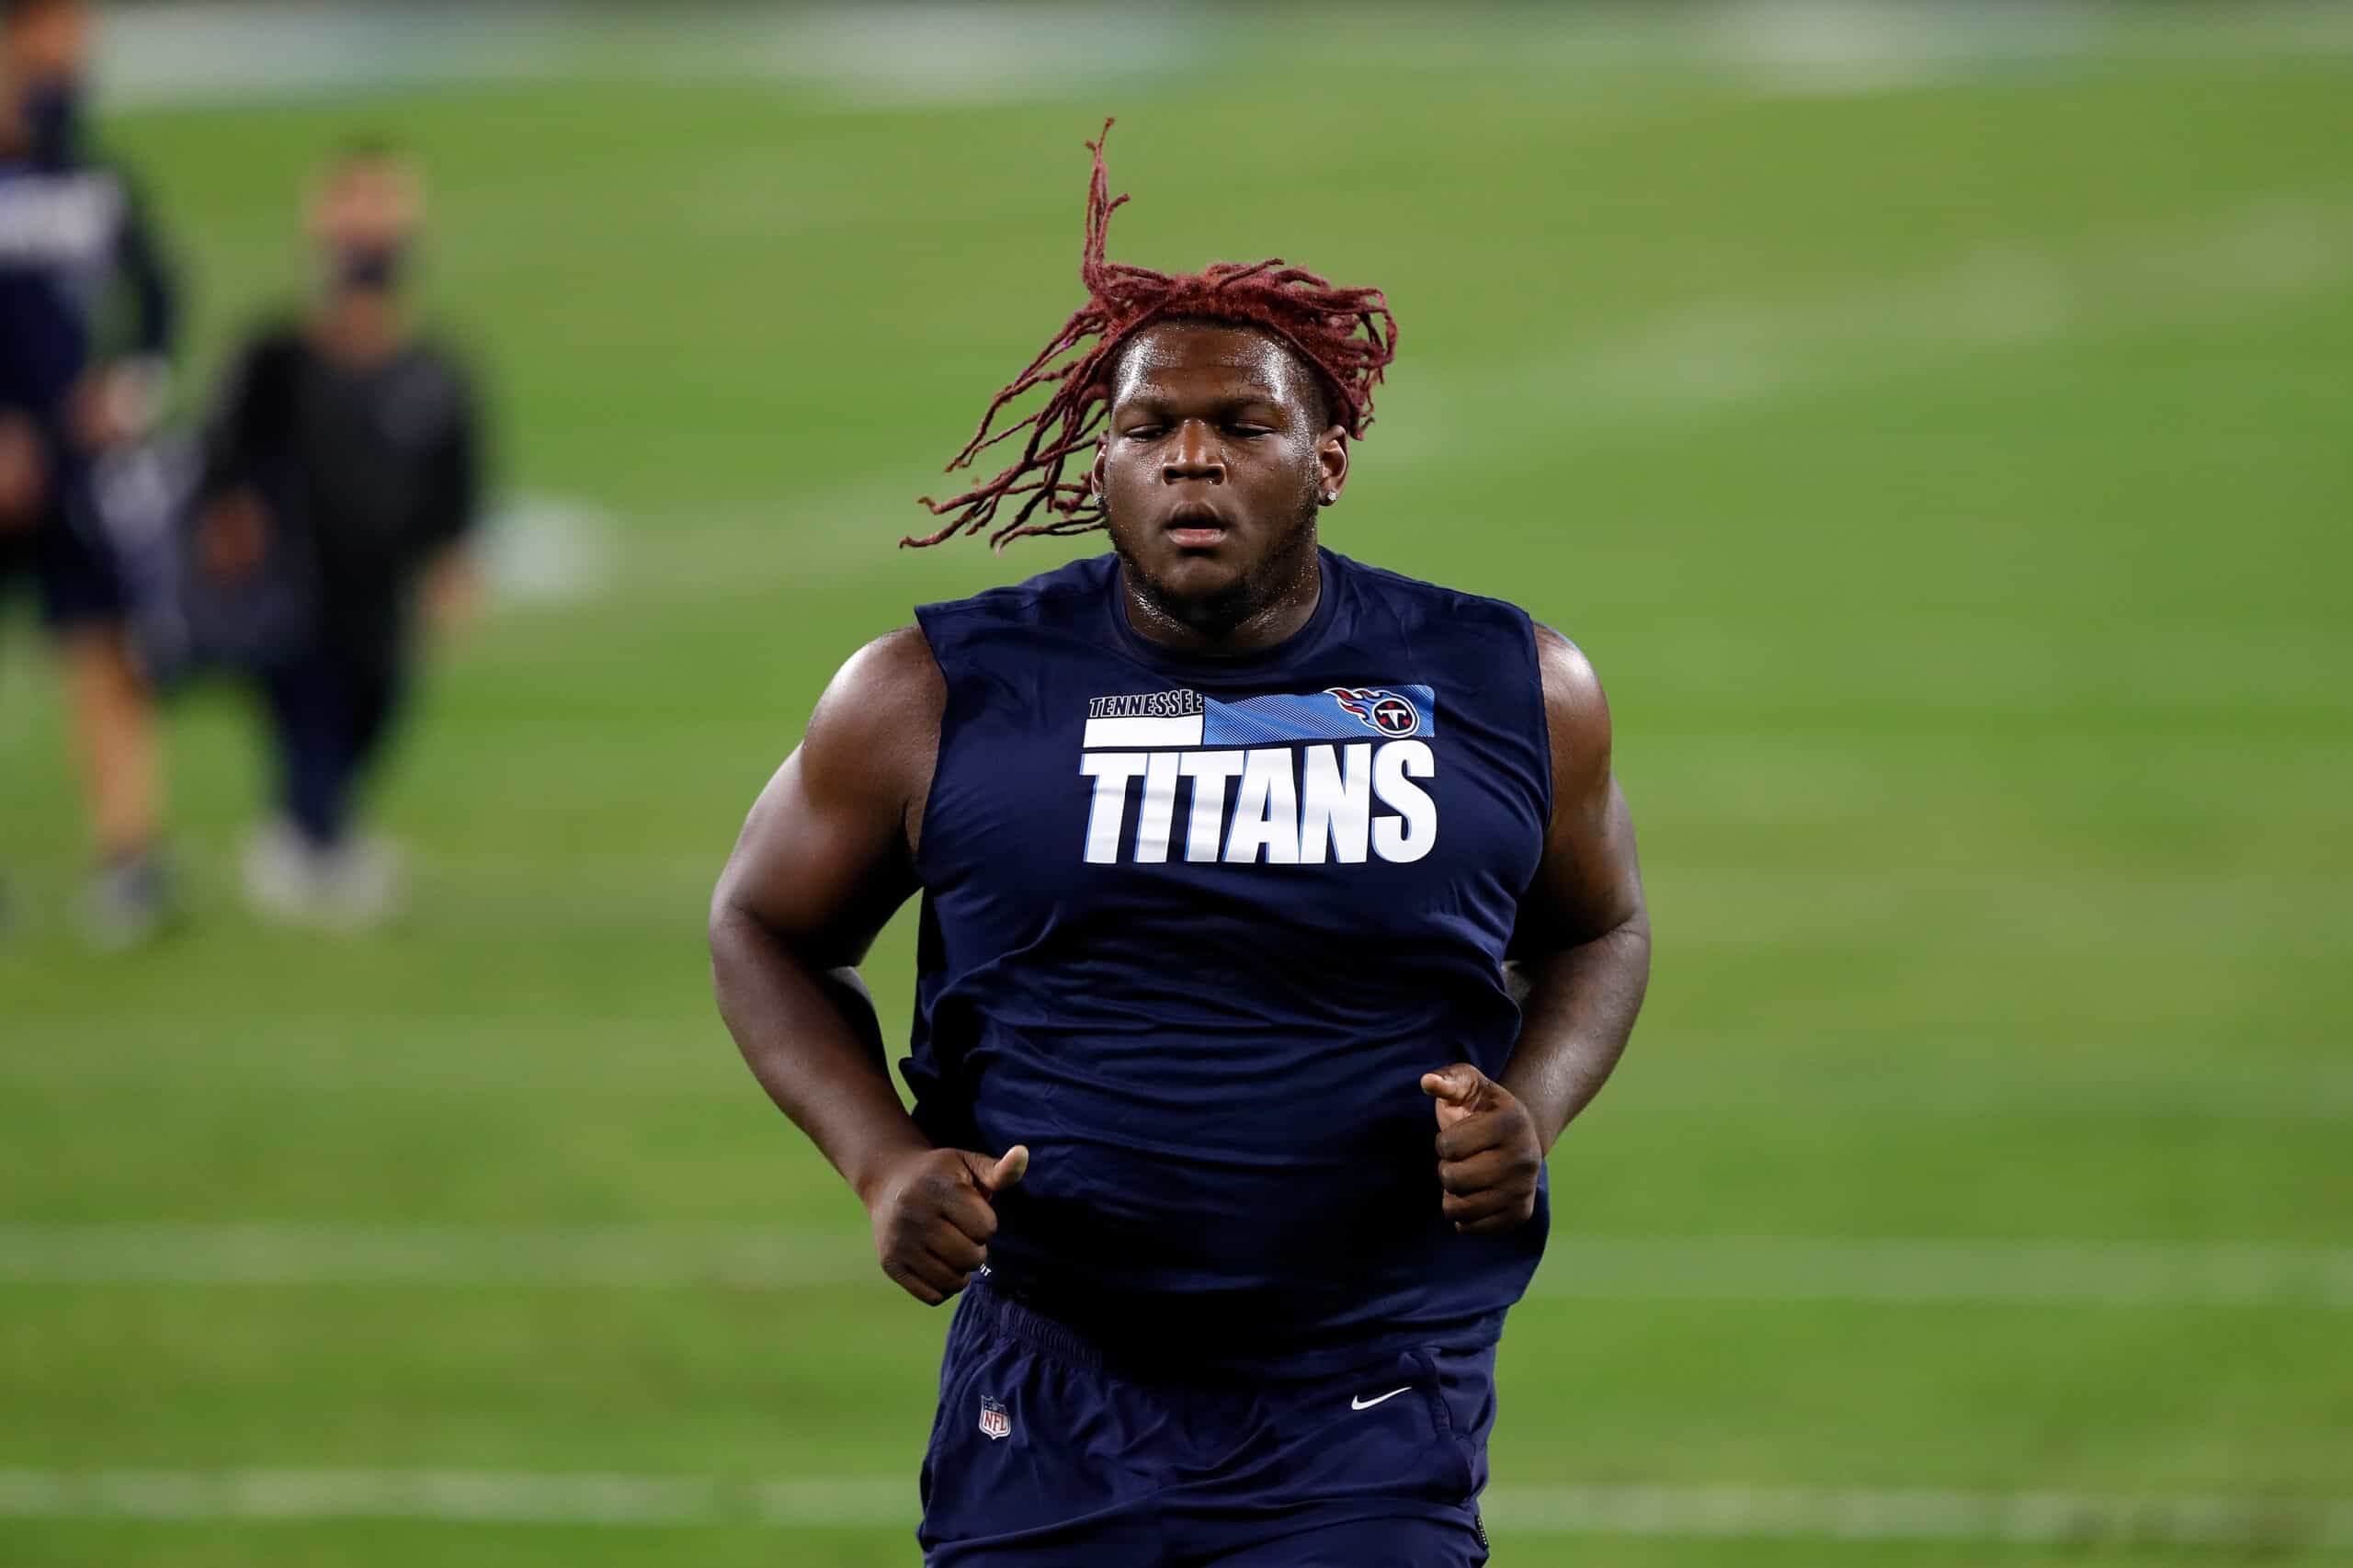 Isaiah Wilson #79 of the Tennessee Titans participates in warmups prior to a game against the Indianapolis Colts at Nissan Stadium on November 12, 2020 in Nashville, Tennessee.